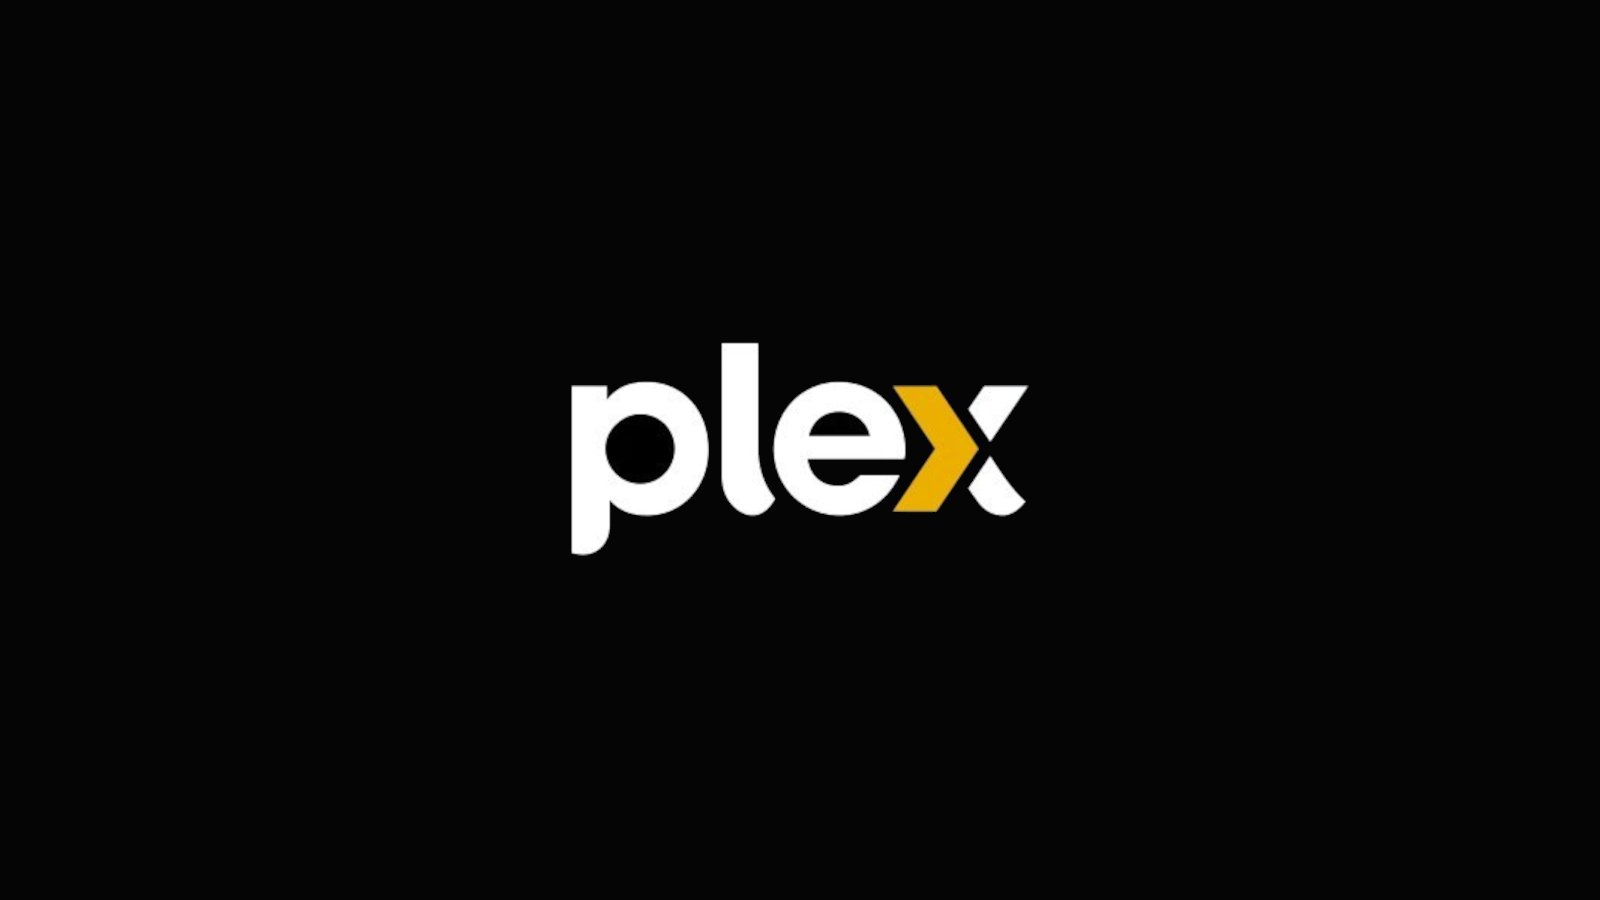 Plex warns users to reset passwords after a data breach